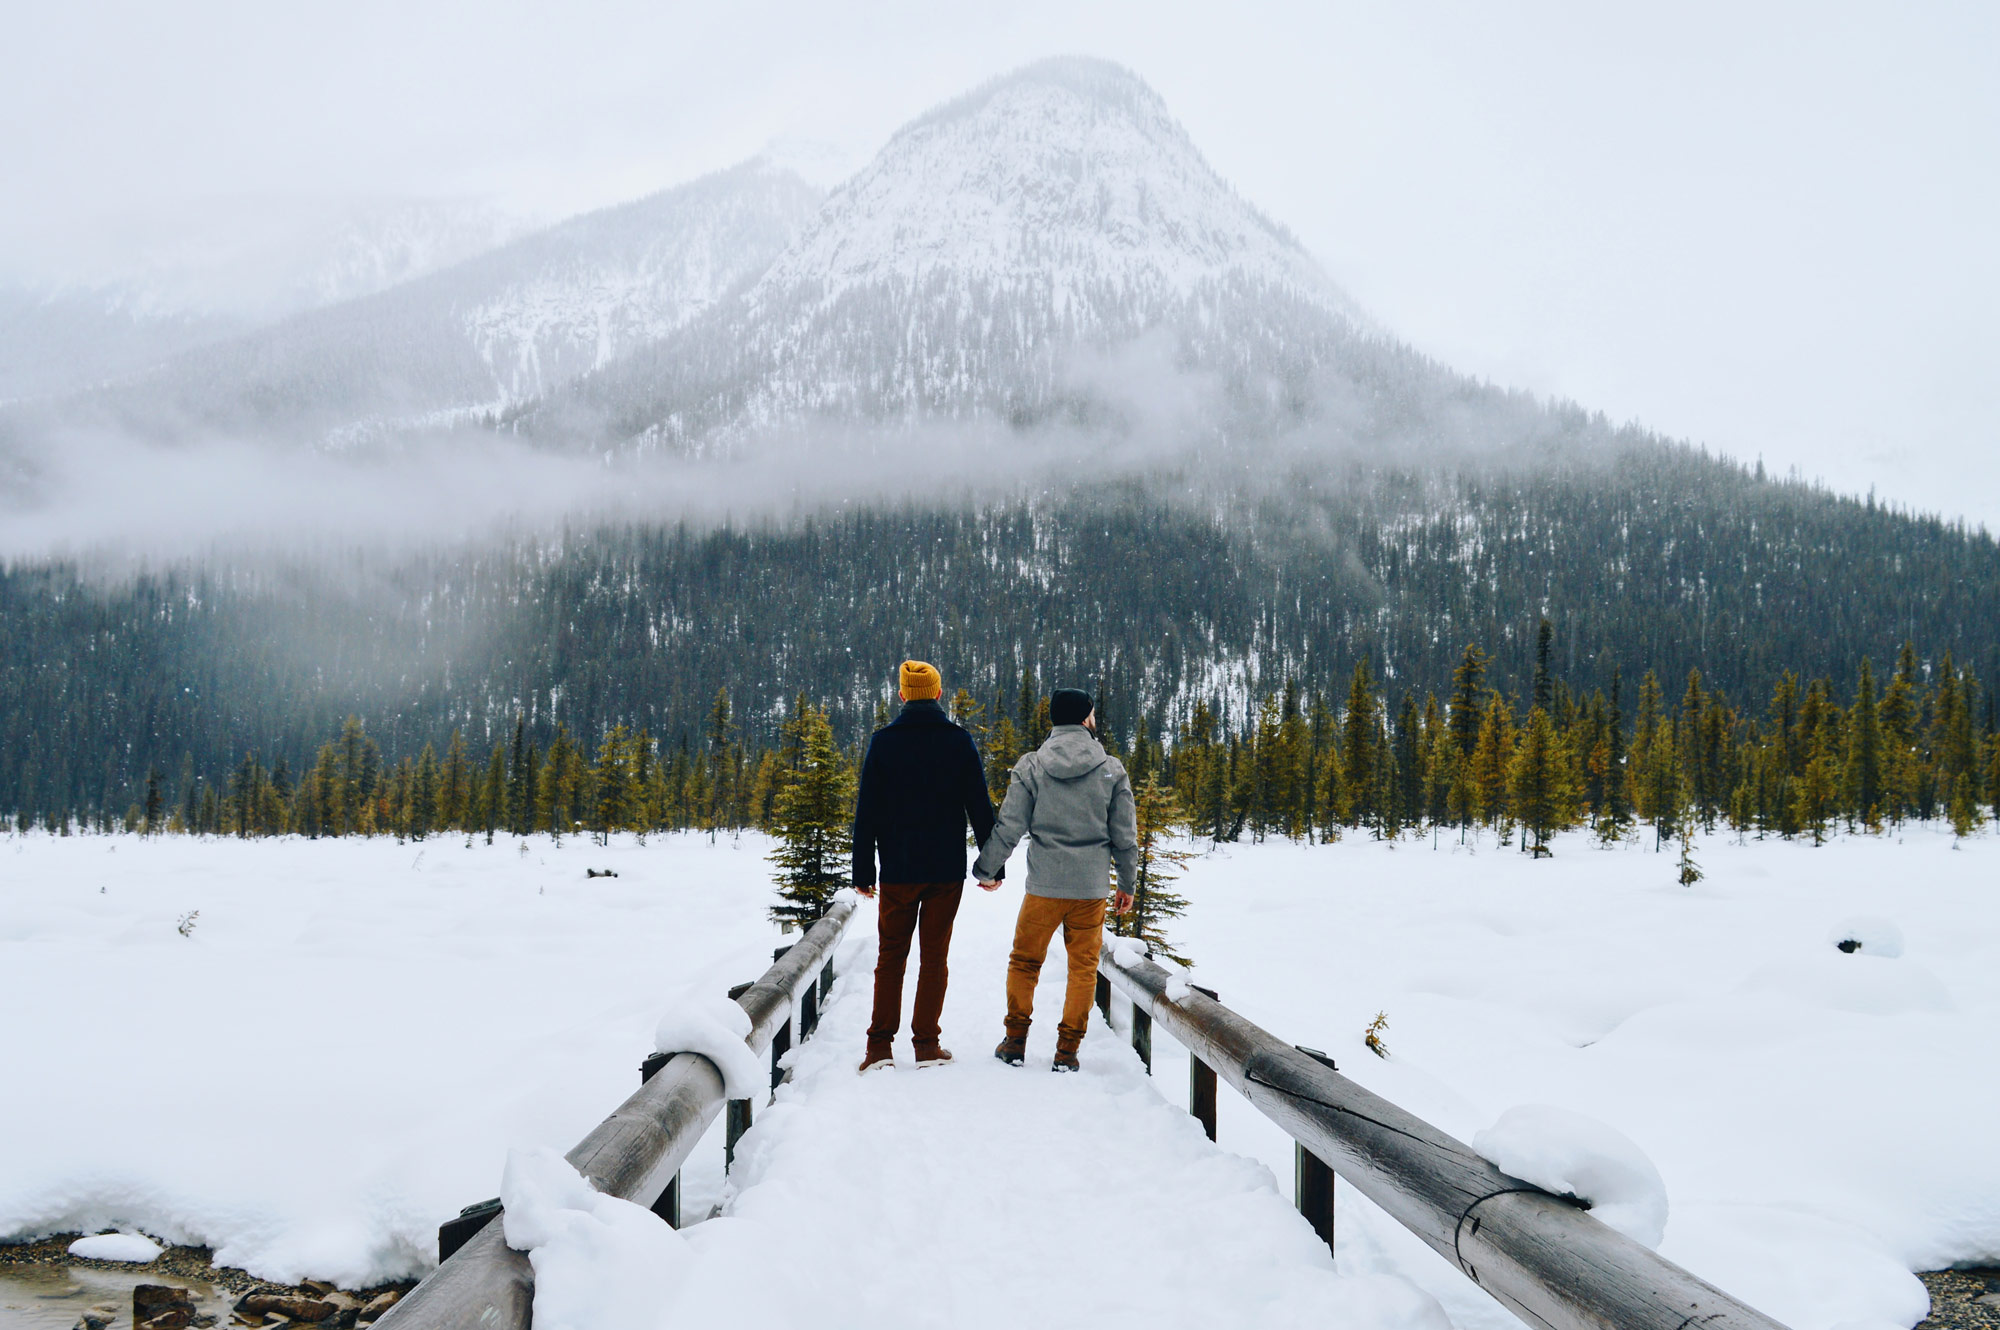 We couldn't resist to take this shot! wow | Emerald Lake Lodge gay-friendly © Coupleofmen.com